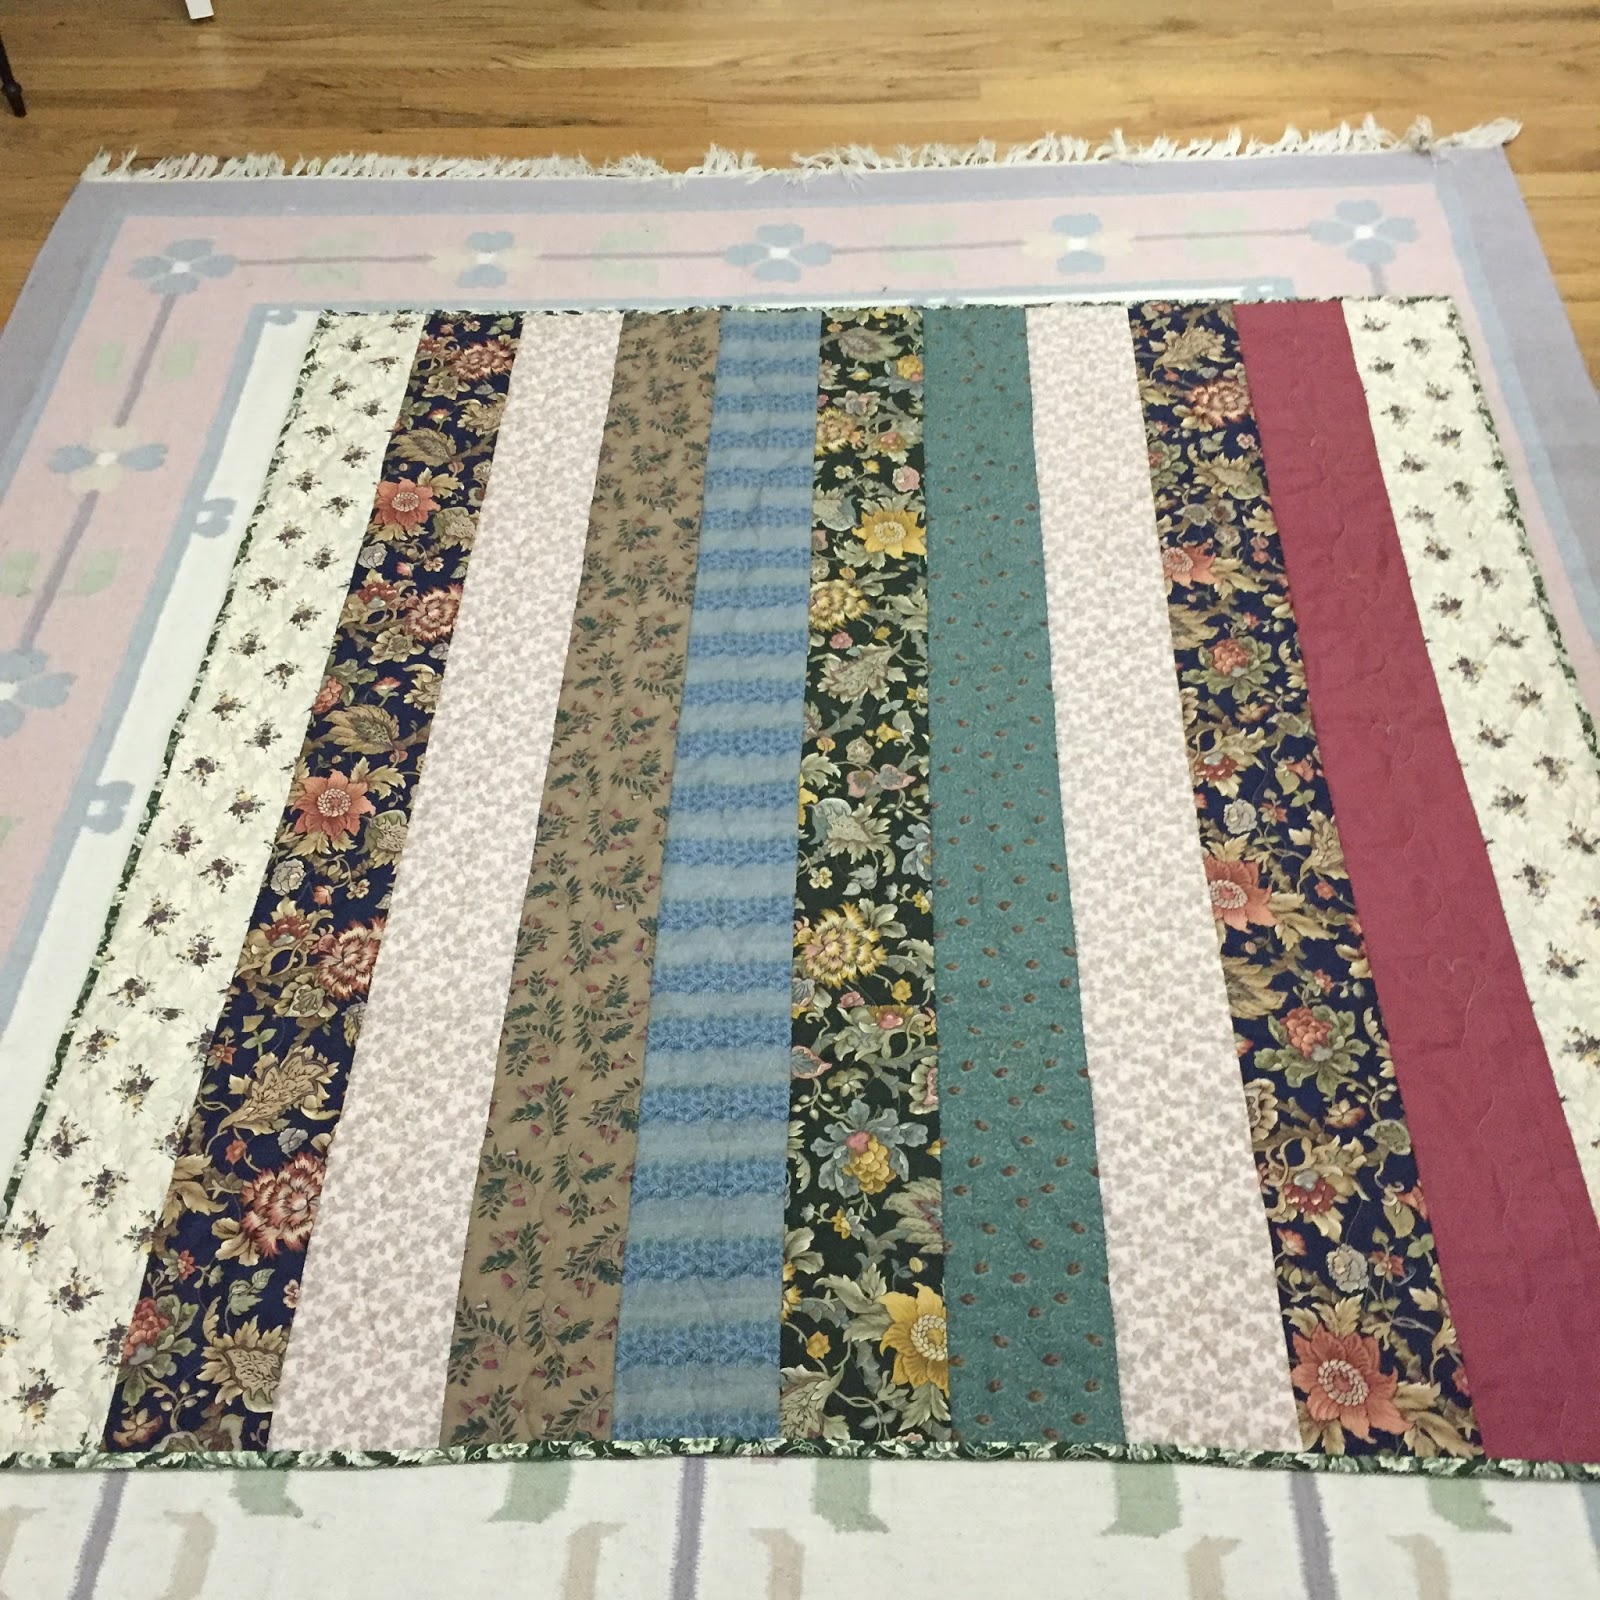 Creative Grids Quilting Is My Therapy 2.5 X 6.5 Ruler